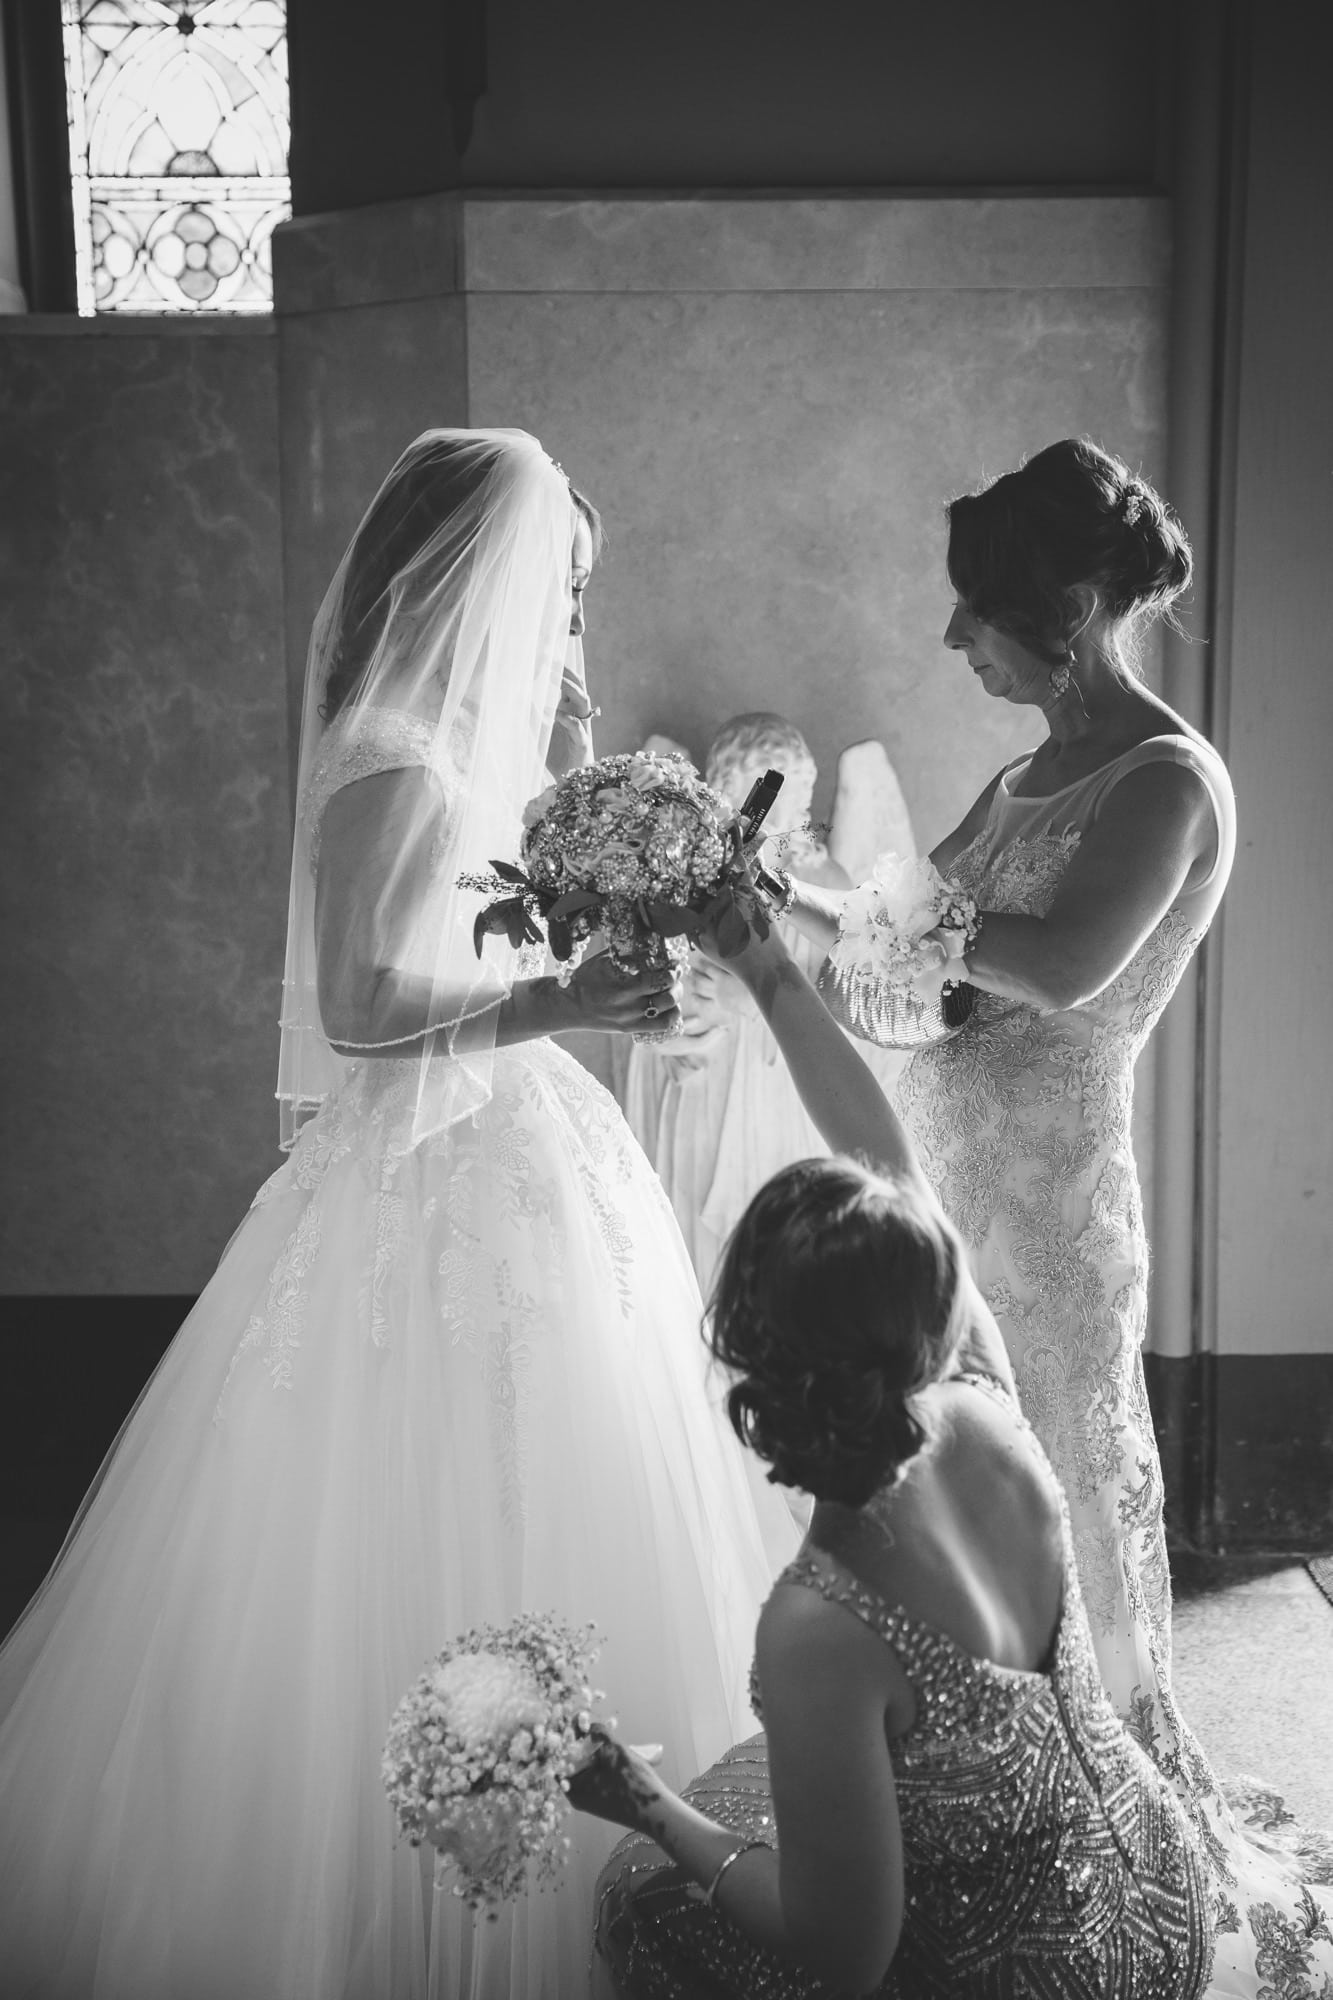 A documentary photograph of a bride's mother and sister preparing her to walk down the aisle of the Cathedral of the Holy Cross during her State Room Wedding in Boston, Massachusetts